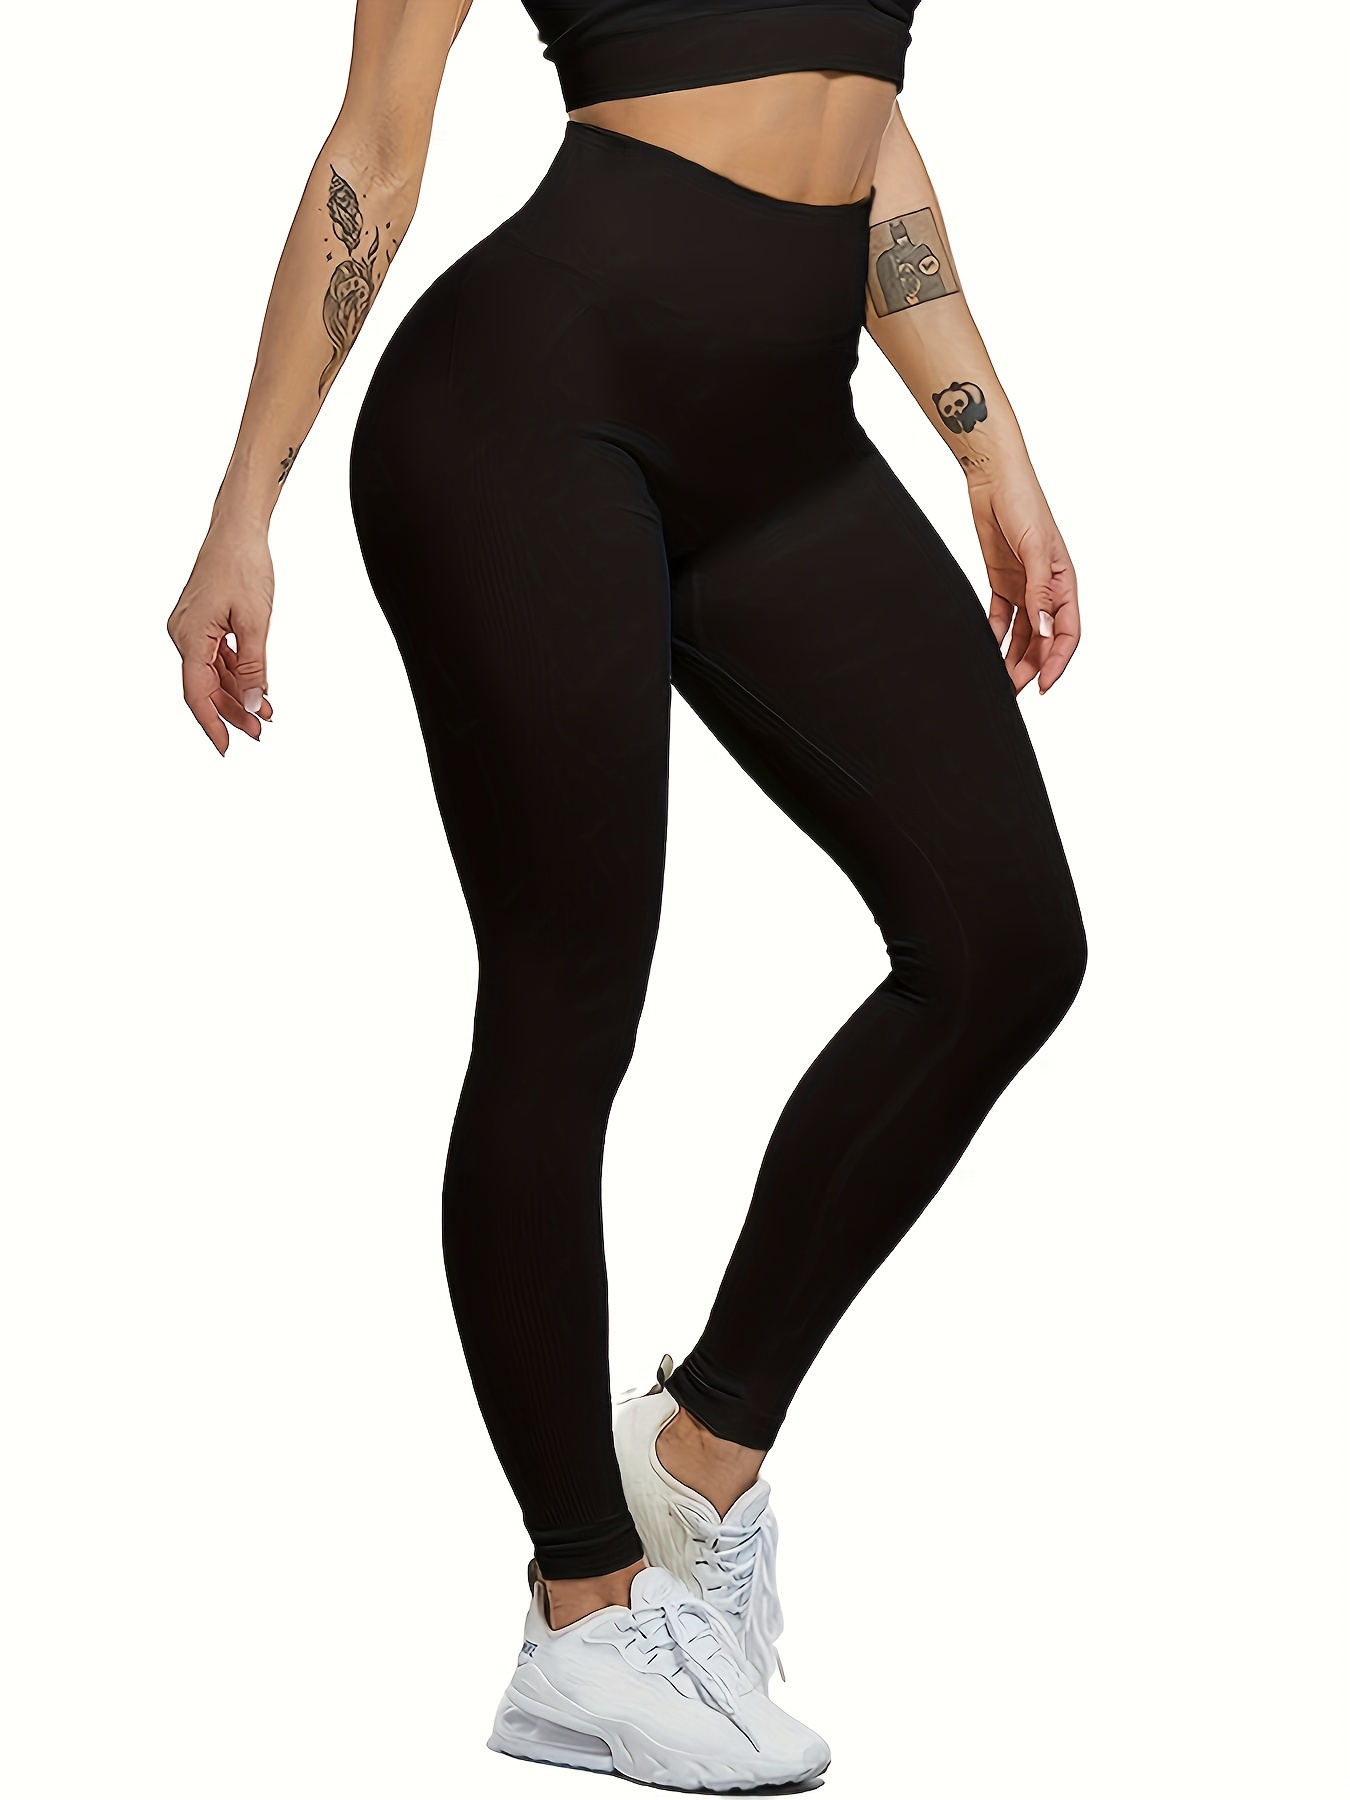 High Waisted Solid Color Yoga Align Leggings For Women Designer Gym Wear  With Elastic Fit 2XL From Apparel876, $11.06